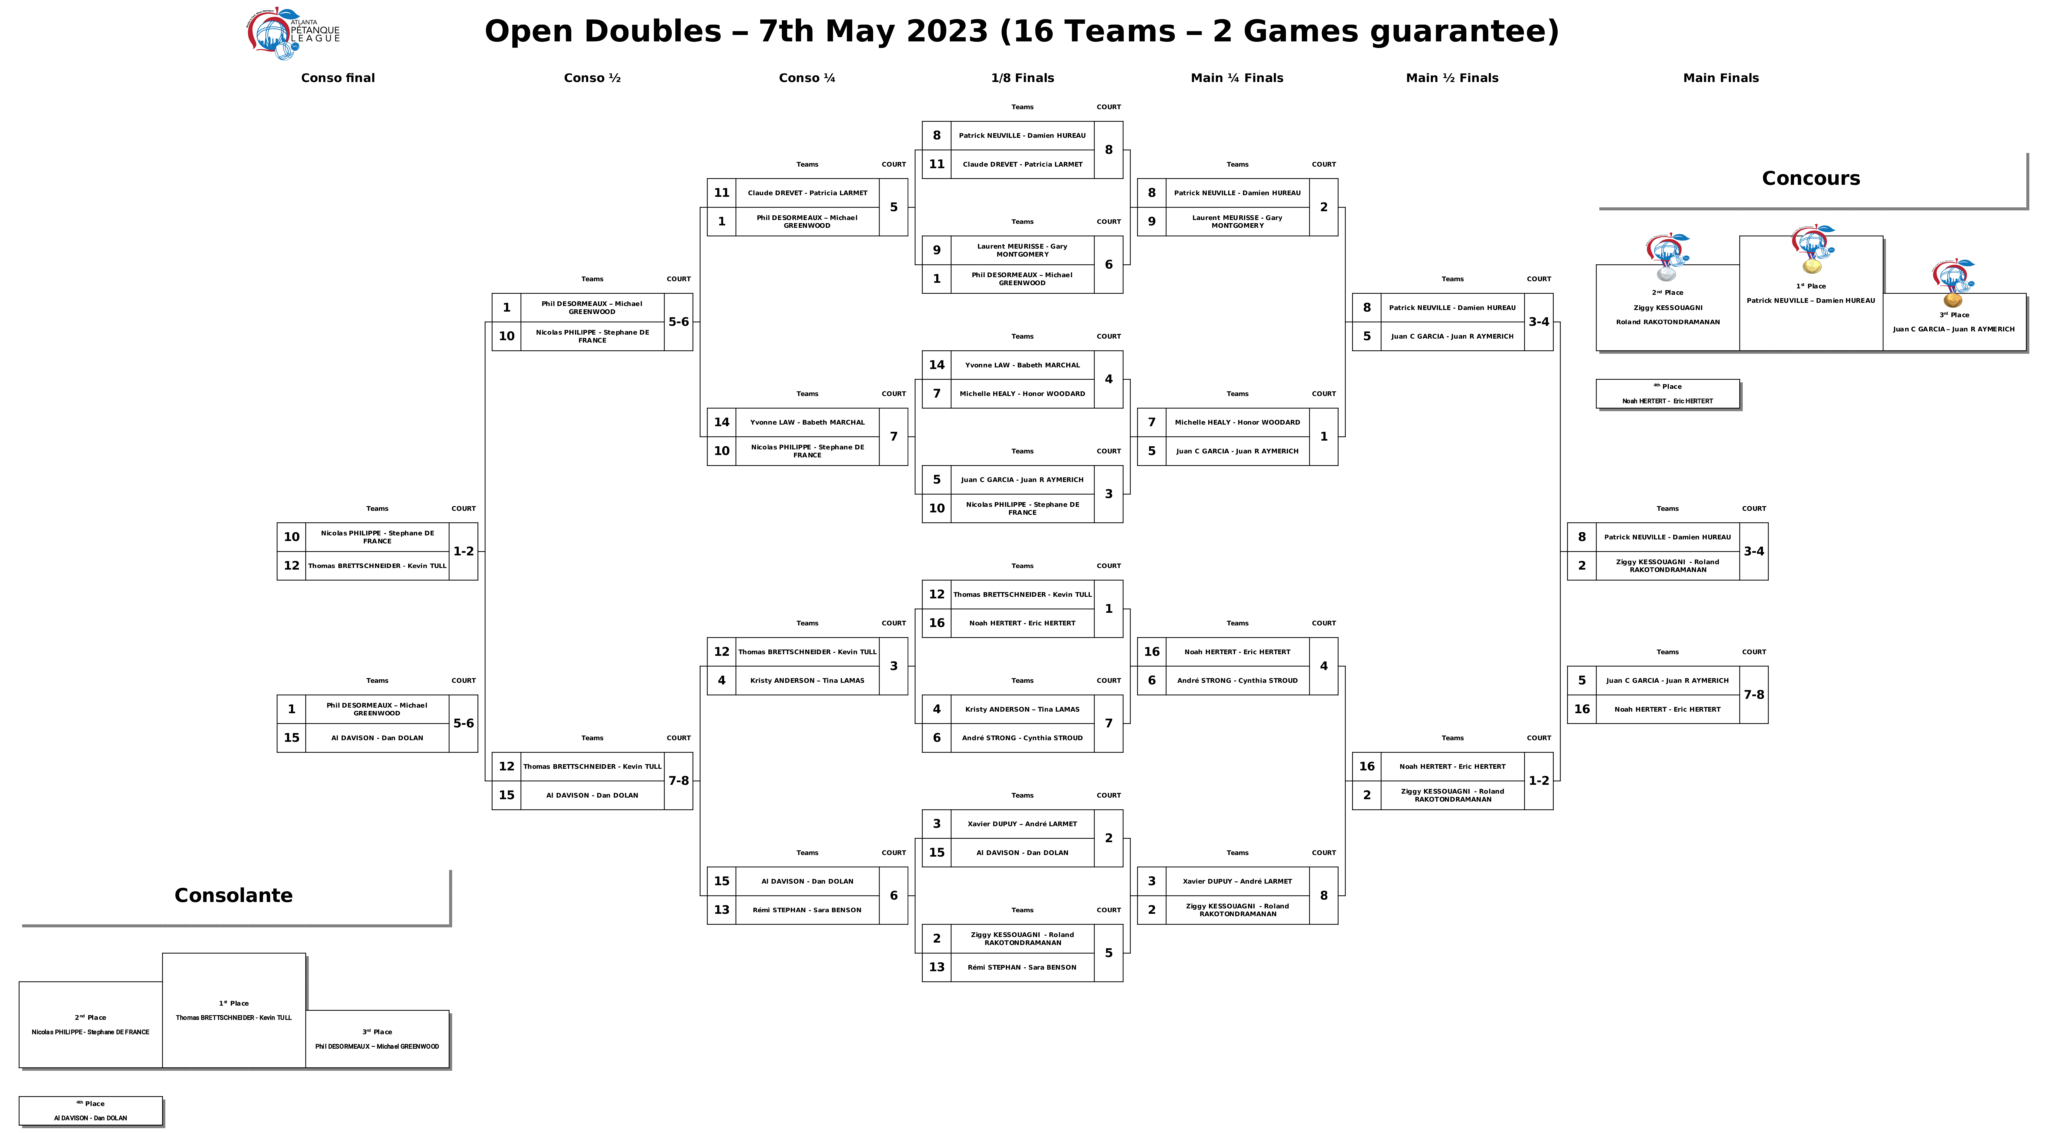 Sep Open players 2022 (15 teams) - Sunday Elimination phase